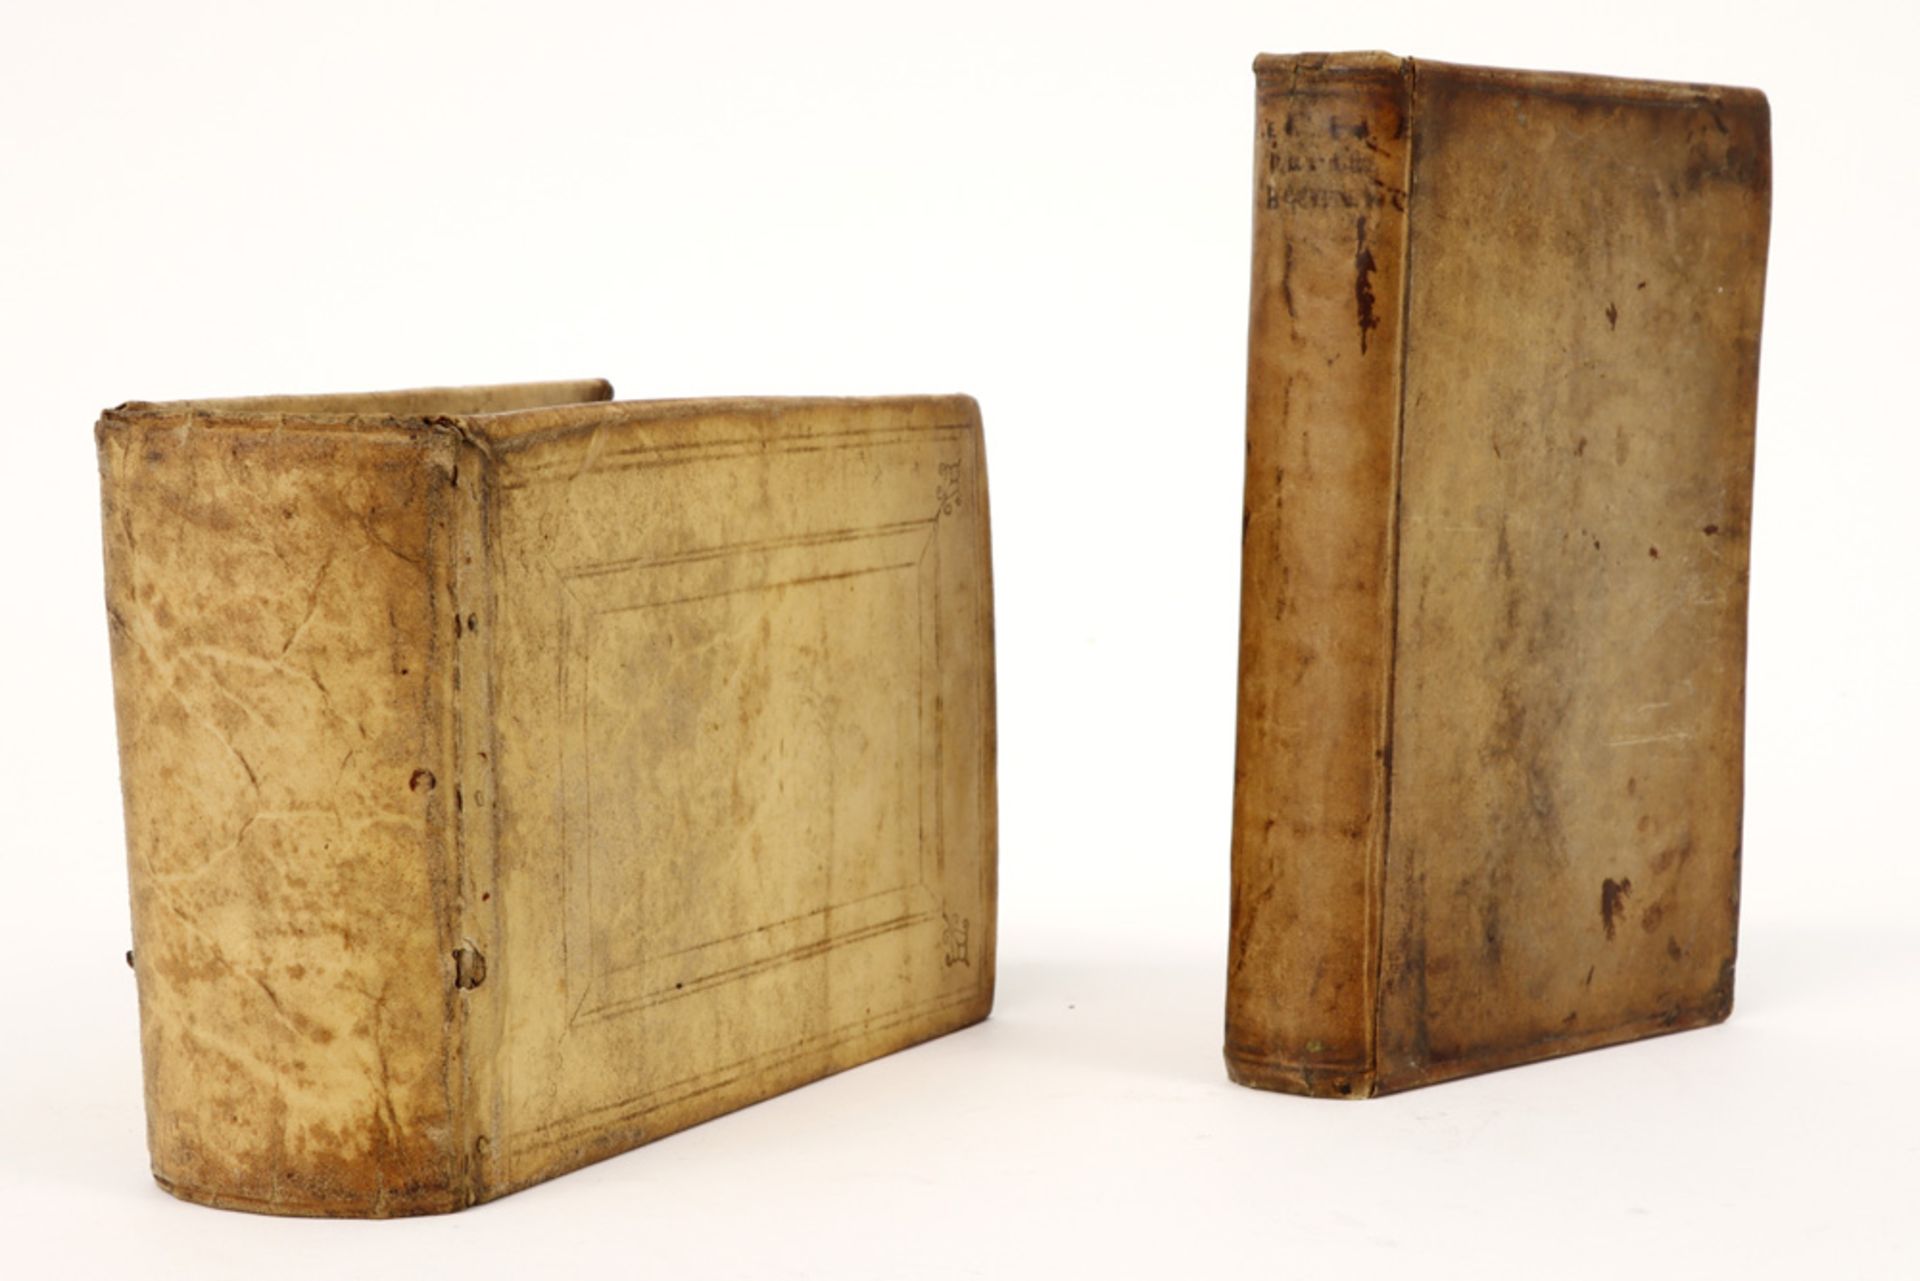 lot of two antique picture Bibles: - one published by Nicolaes Visscher with 144 (?) numbered - Image 2 of 6